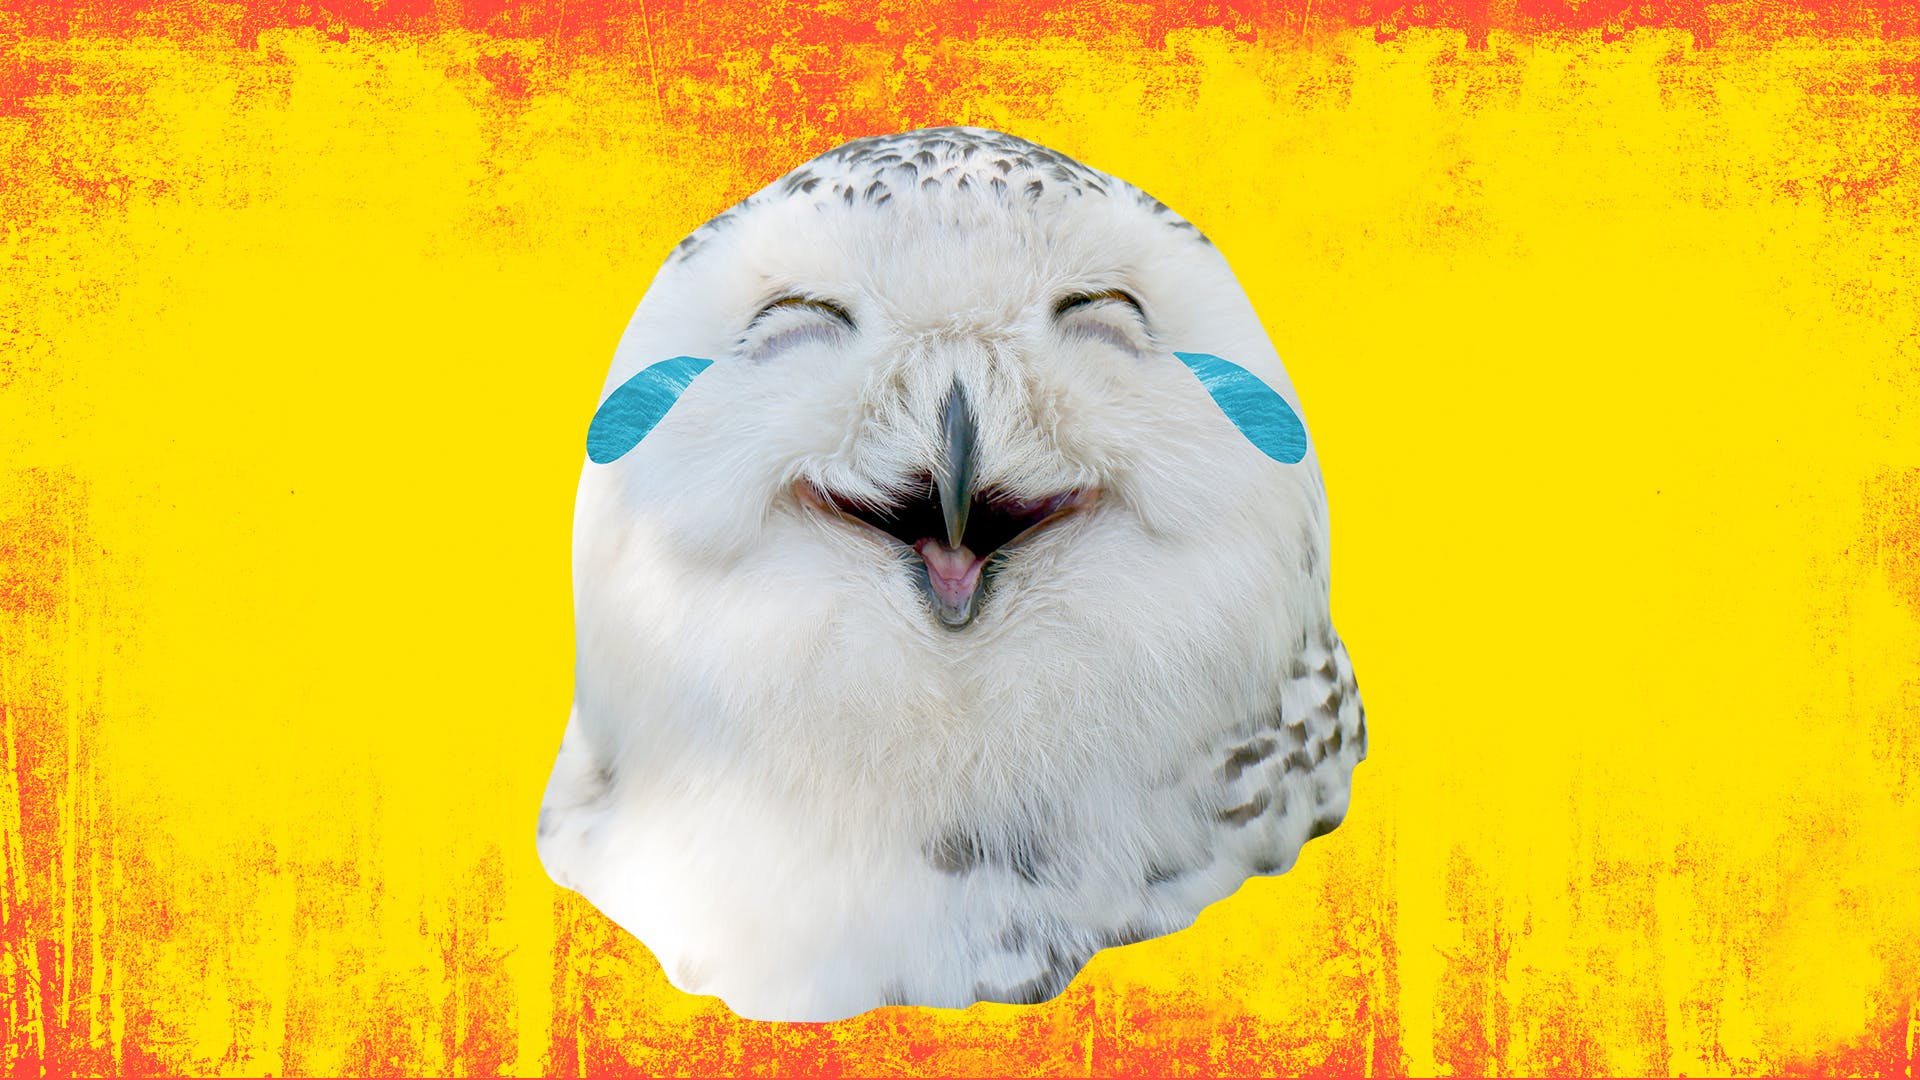 A laughing white owl in front of an orange and red background